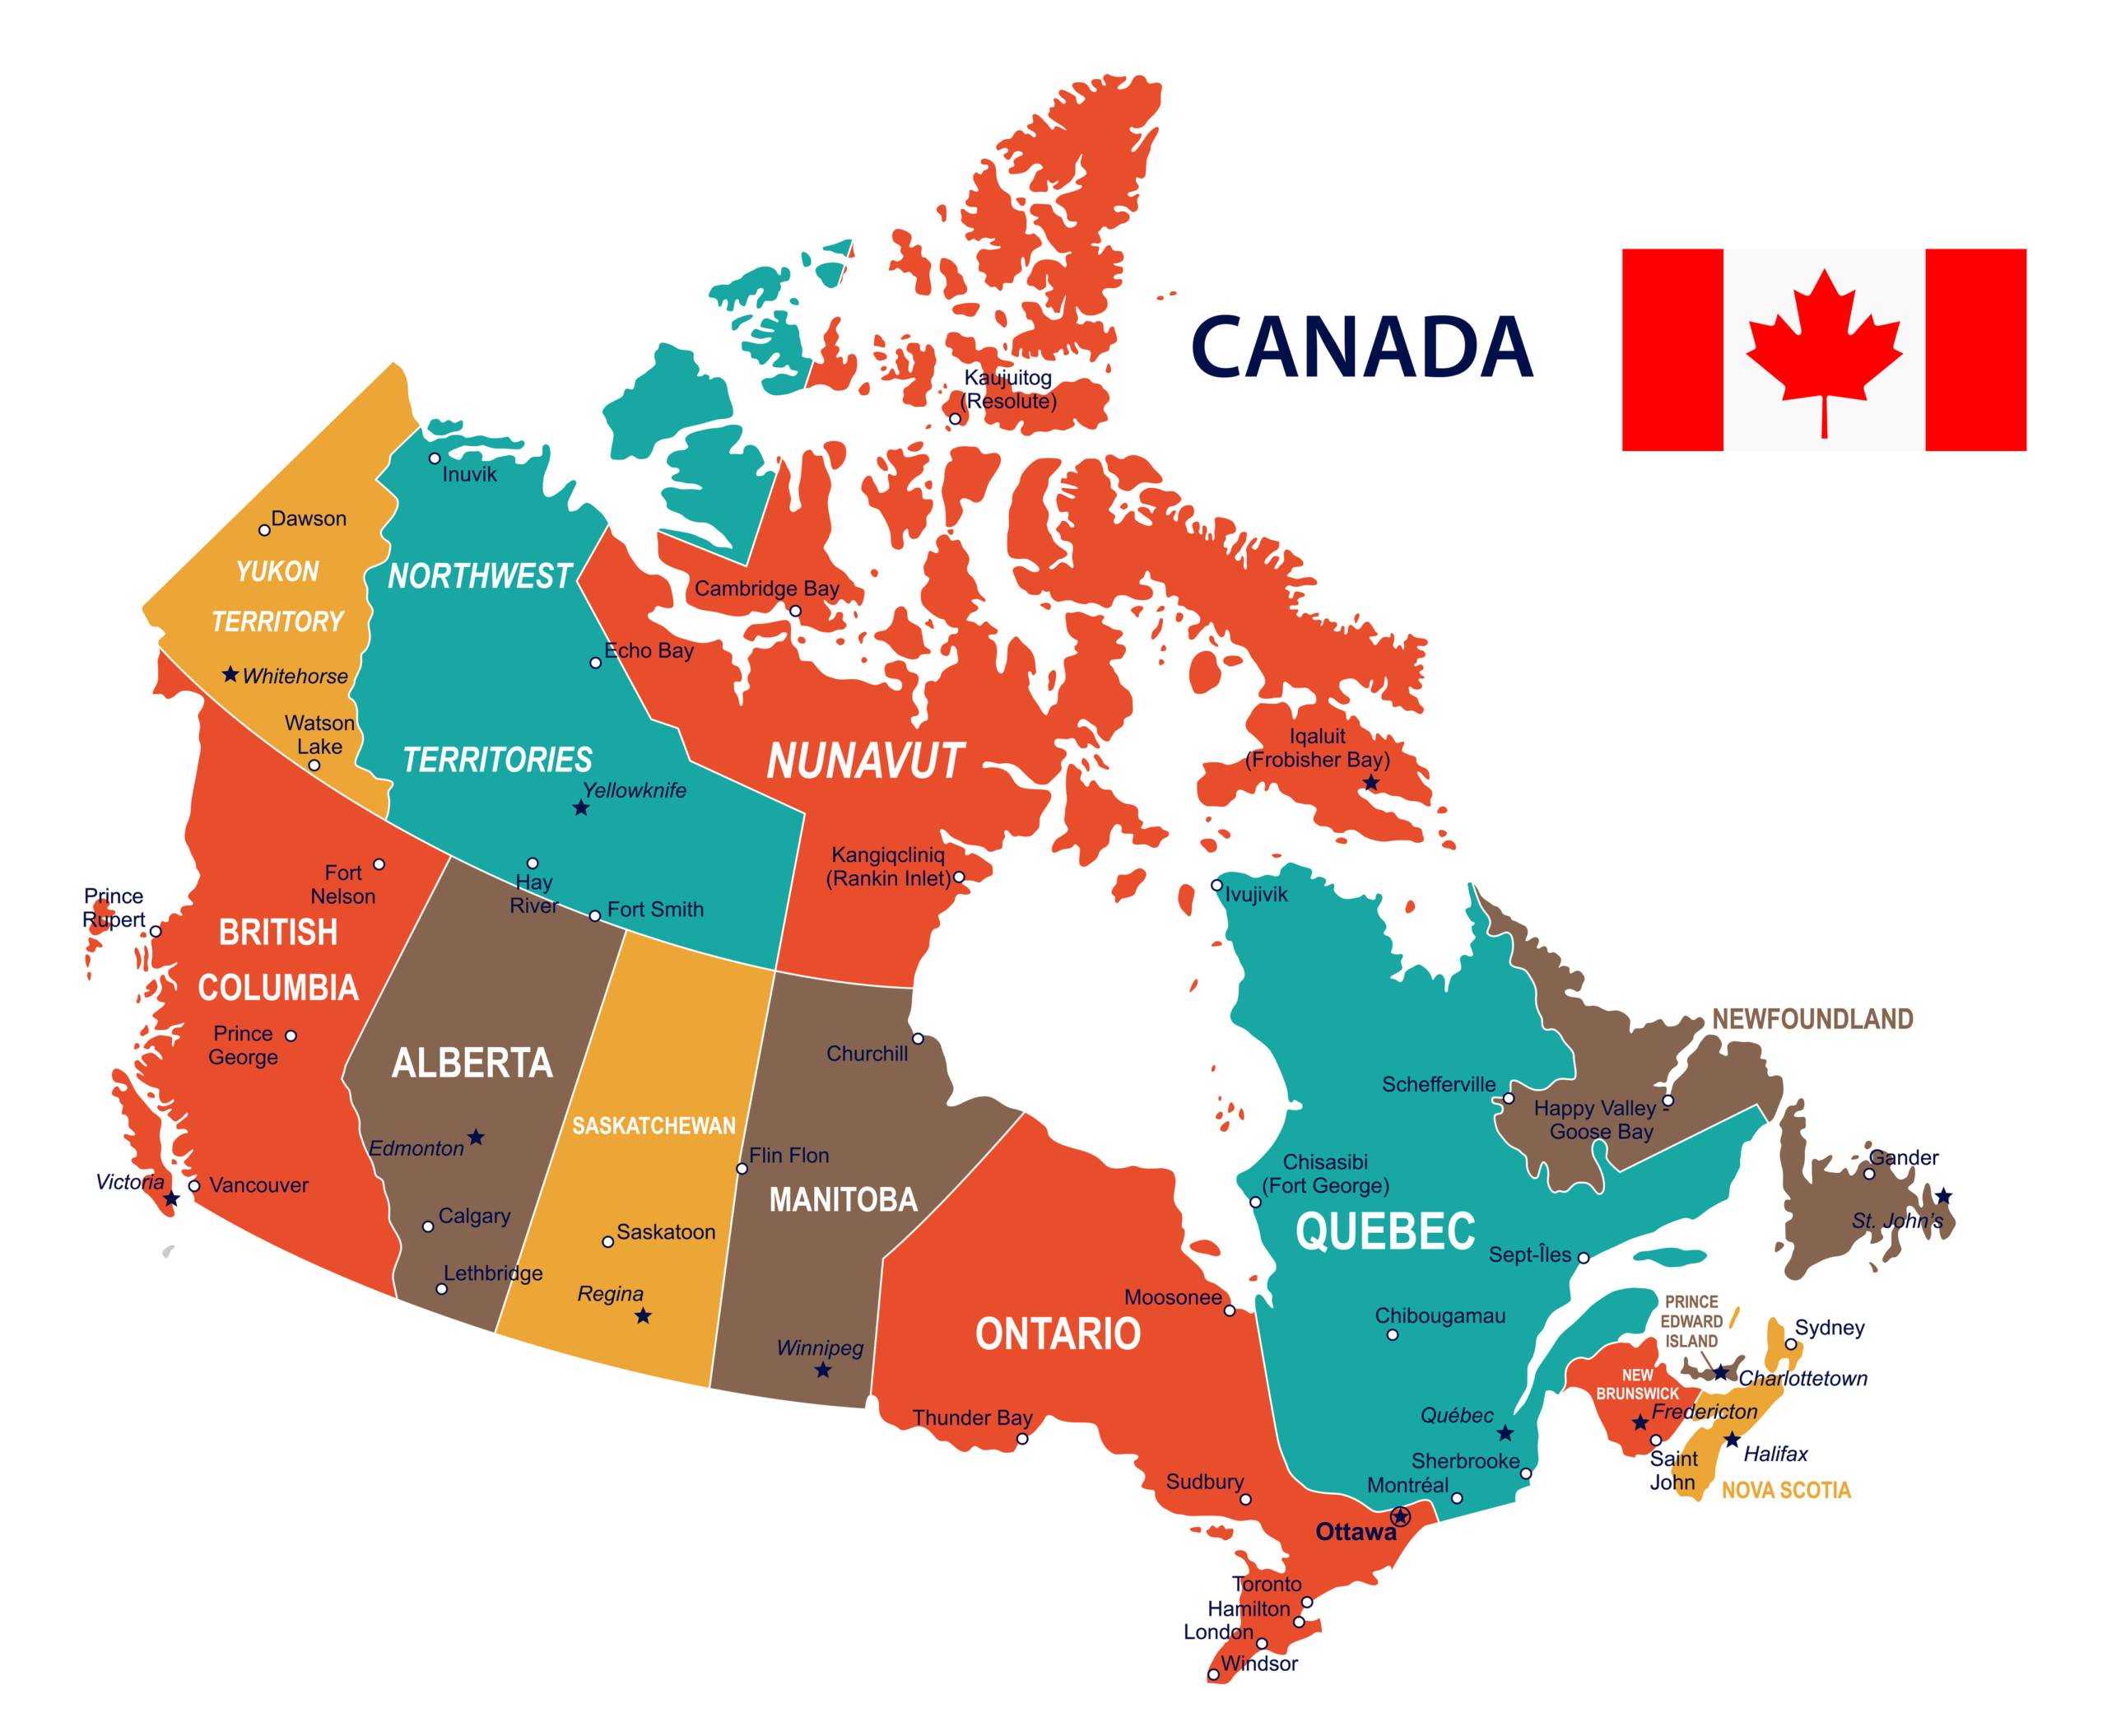 Canada map and flag for growing marijuana laws in 2022. SpeedGreens